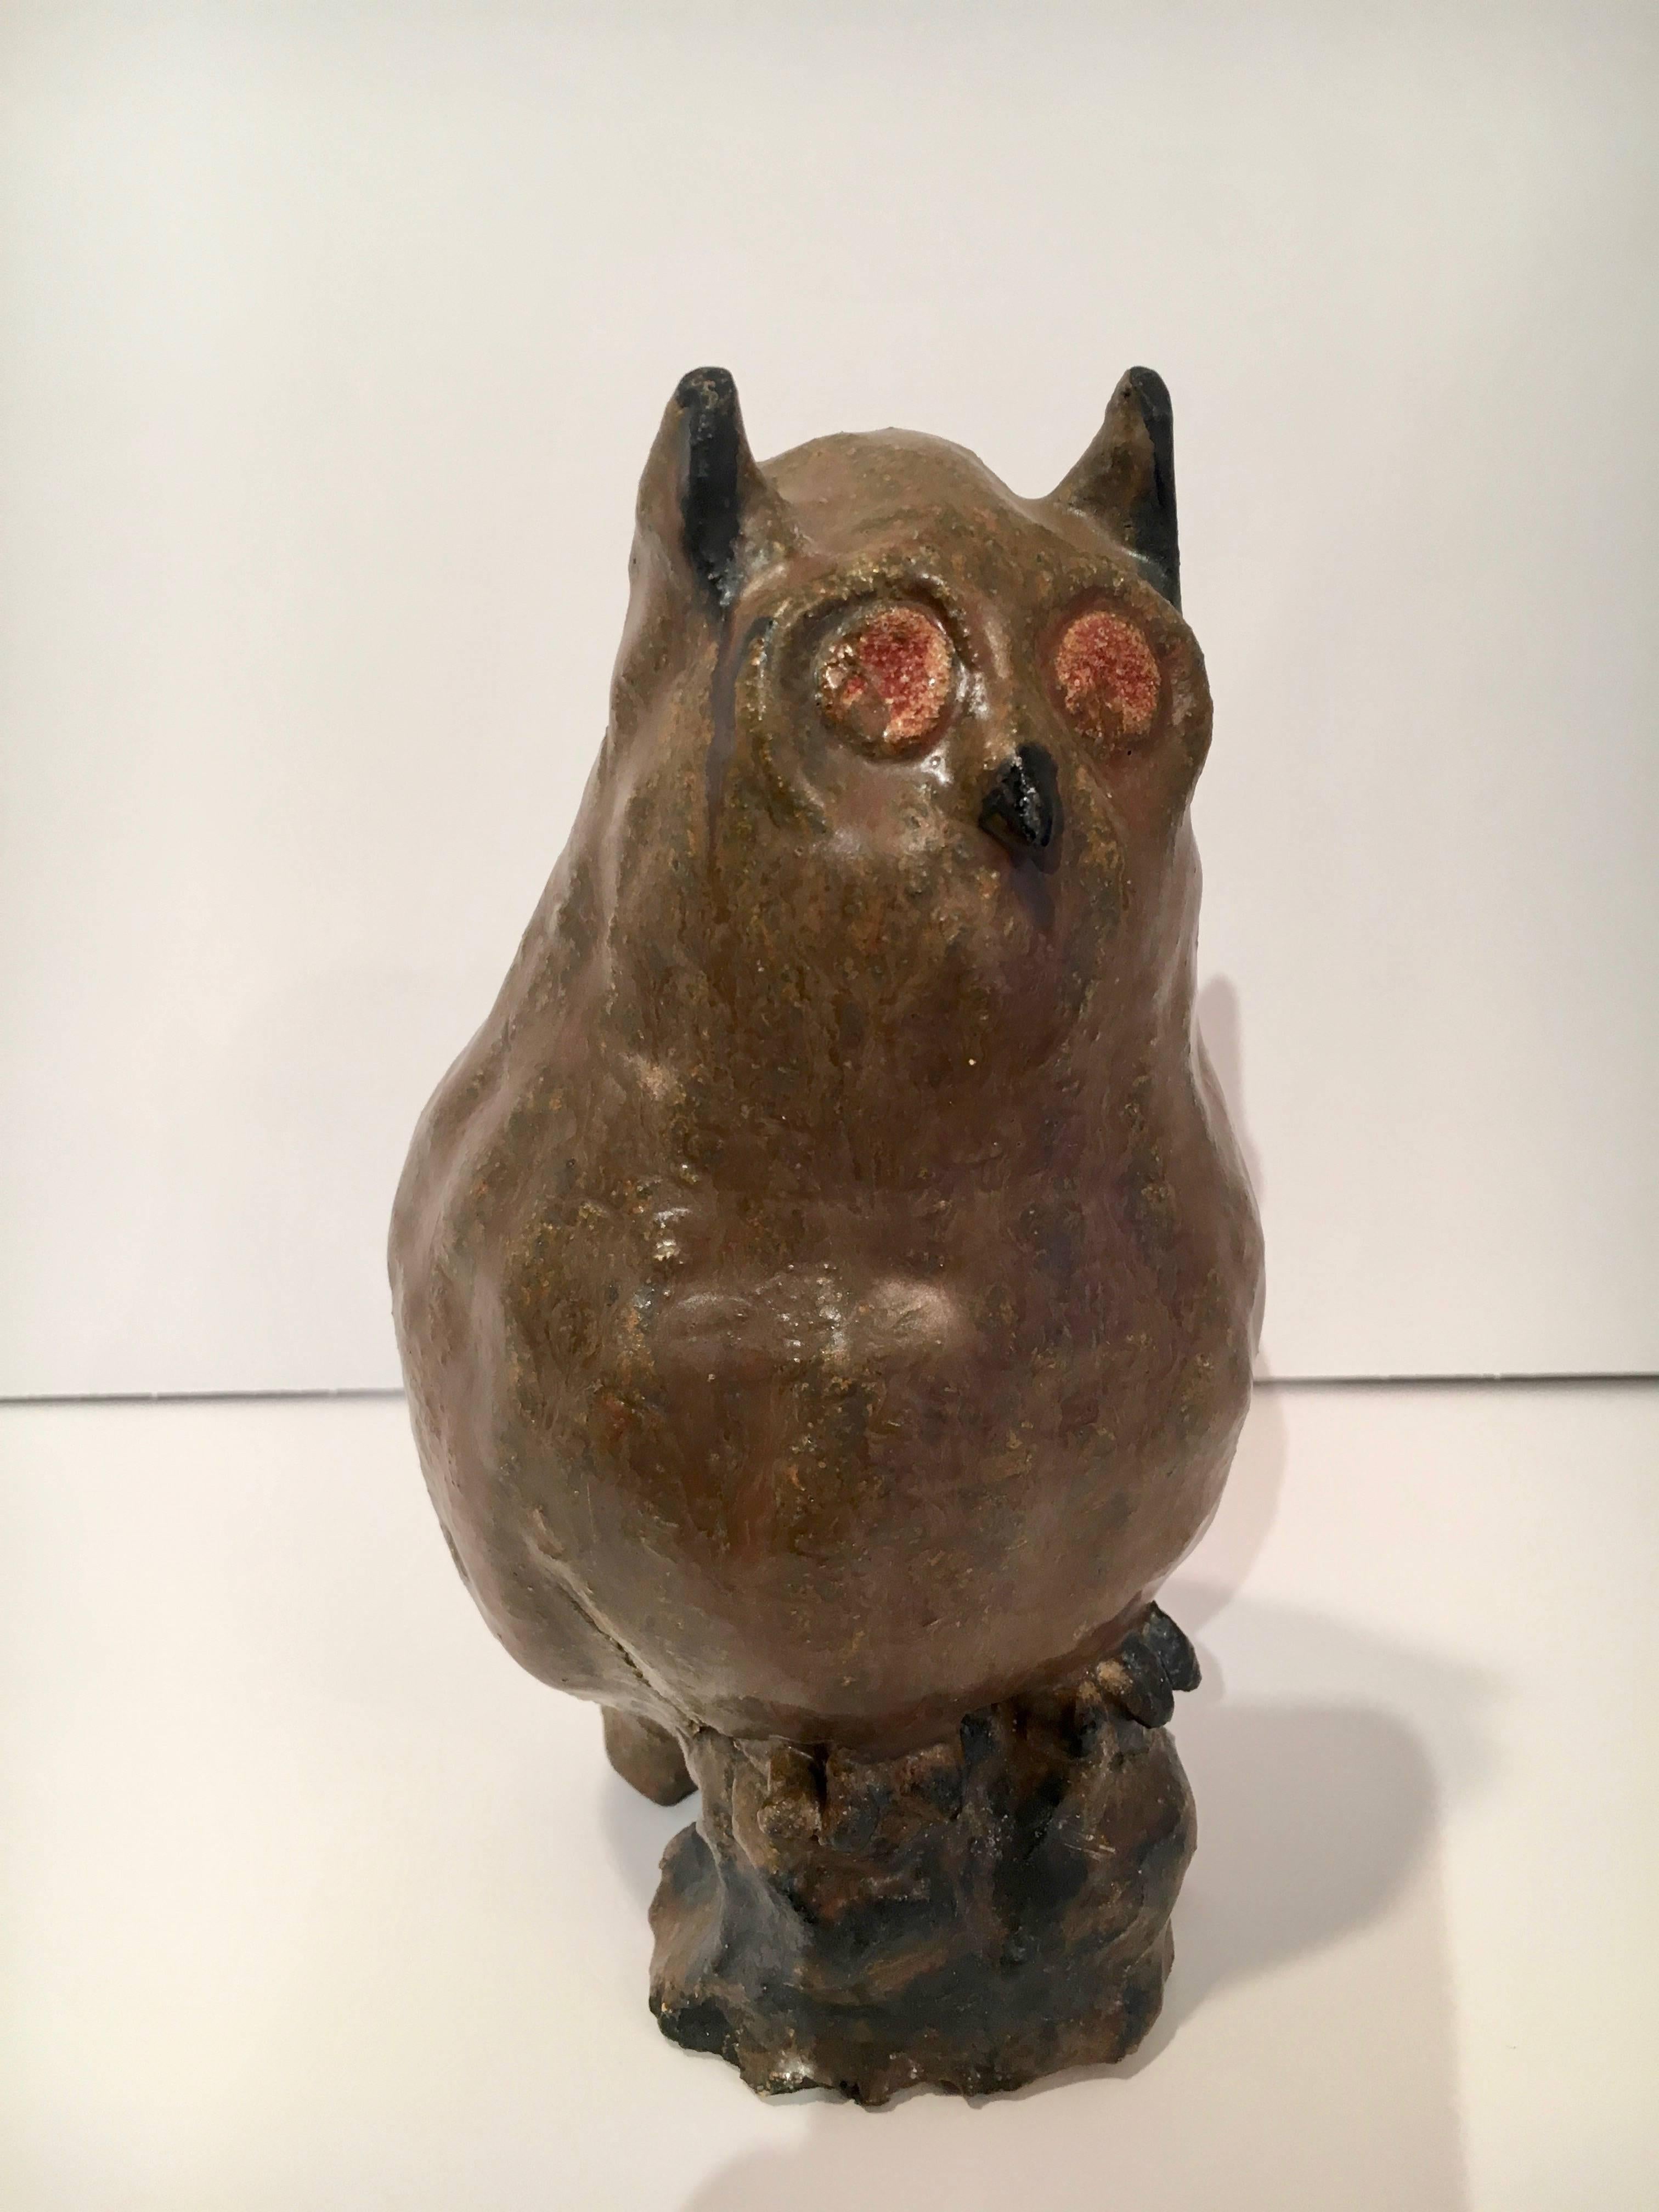 Folk Art clay owl sculpture - a unique and handmade sculpture of an owl. Darren Ransdell Design has many sculptures. This piece is a compliment to any shelf or desk - perhaps sitting atop a stack of books?
     